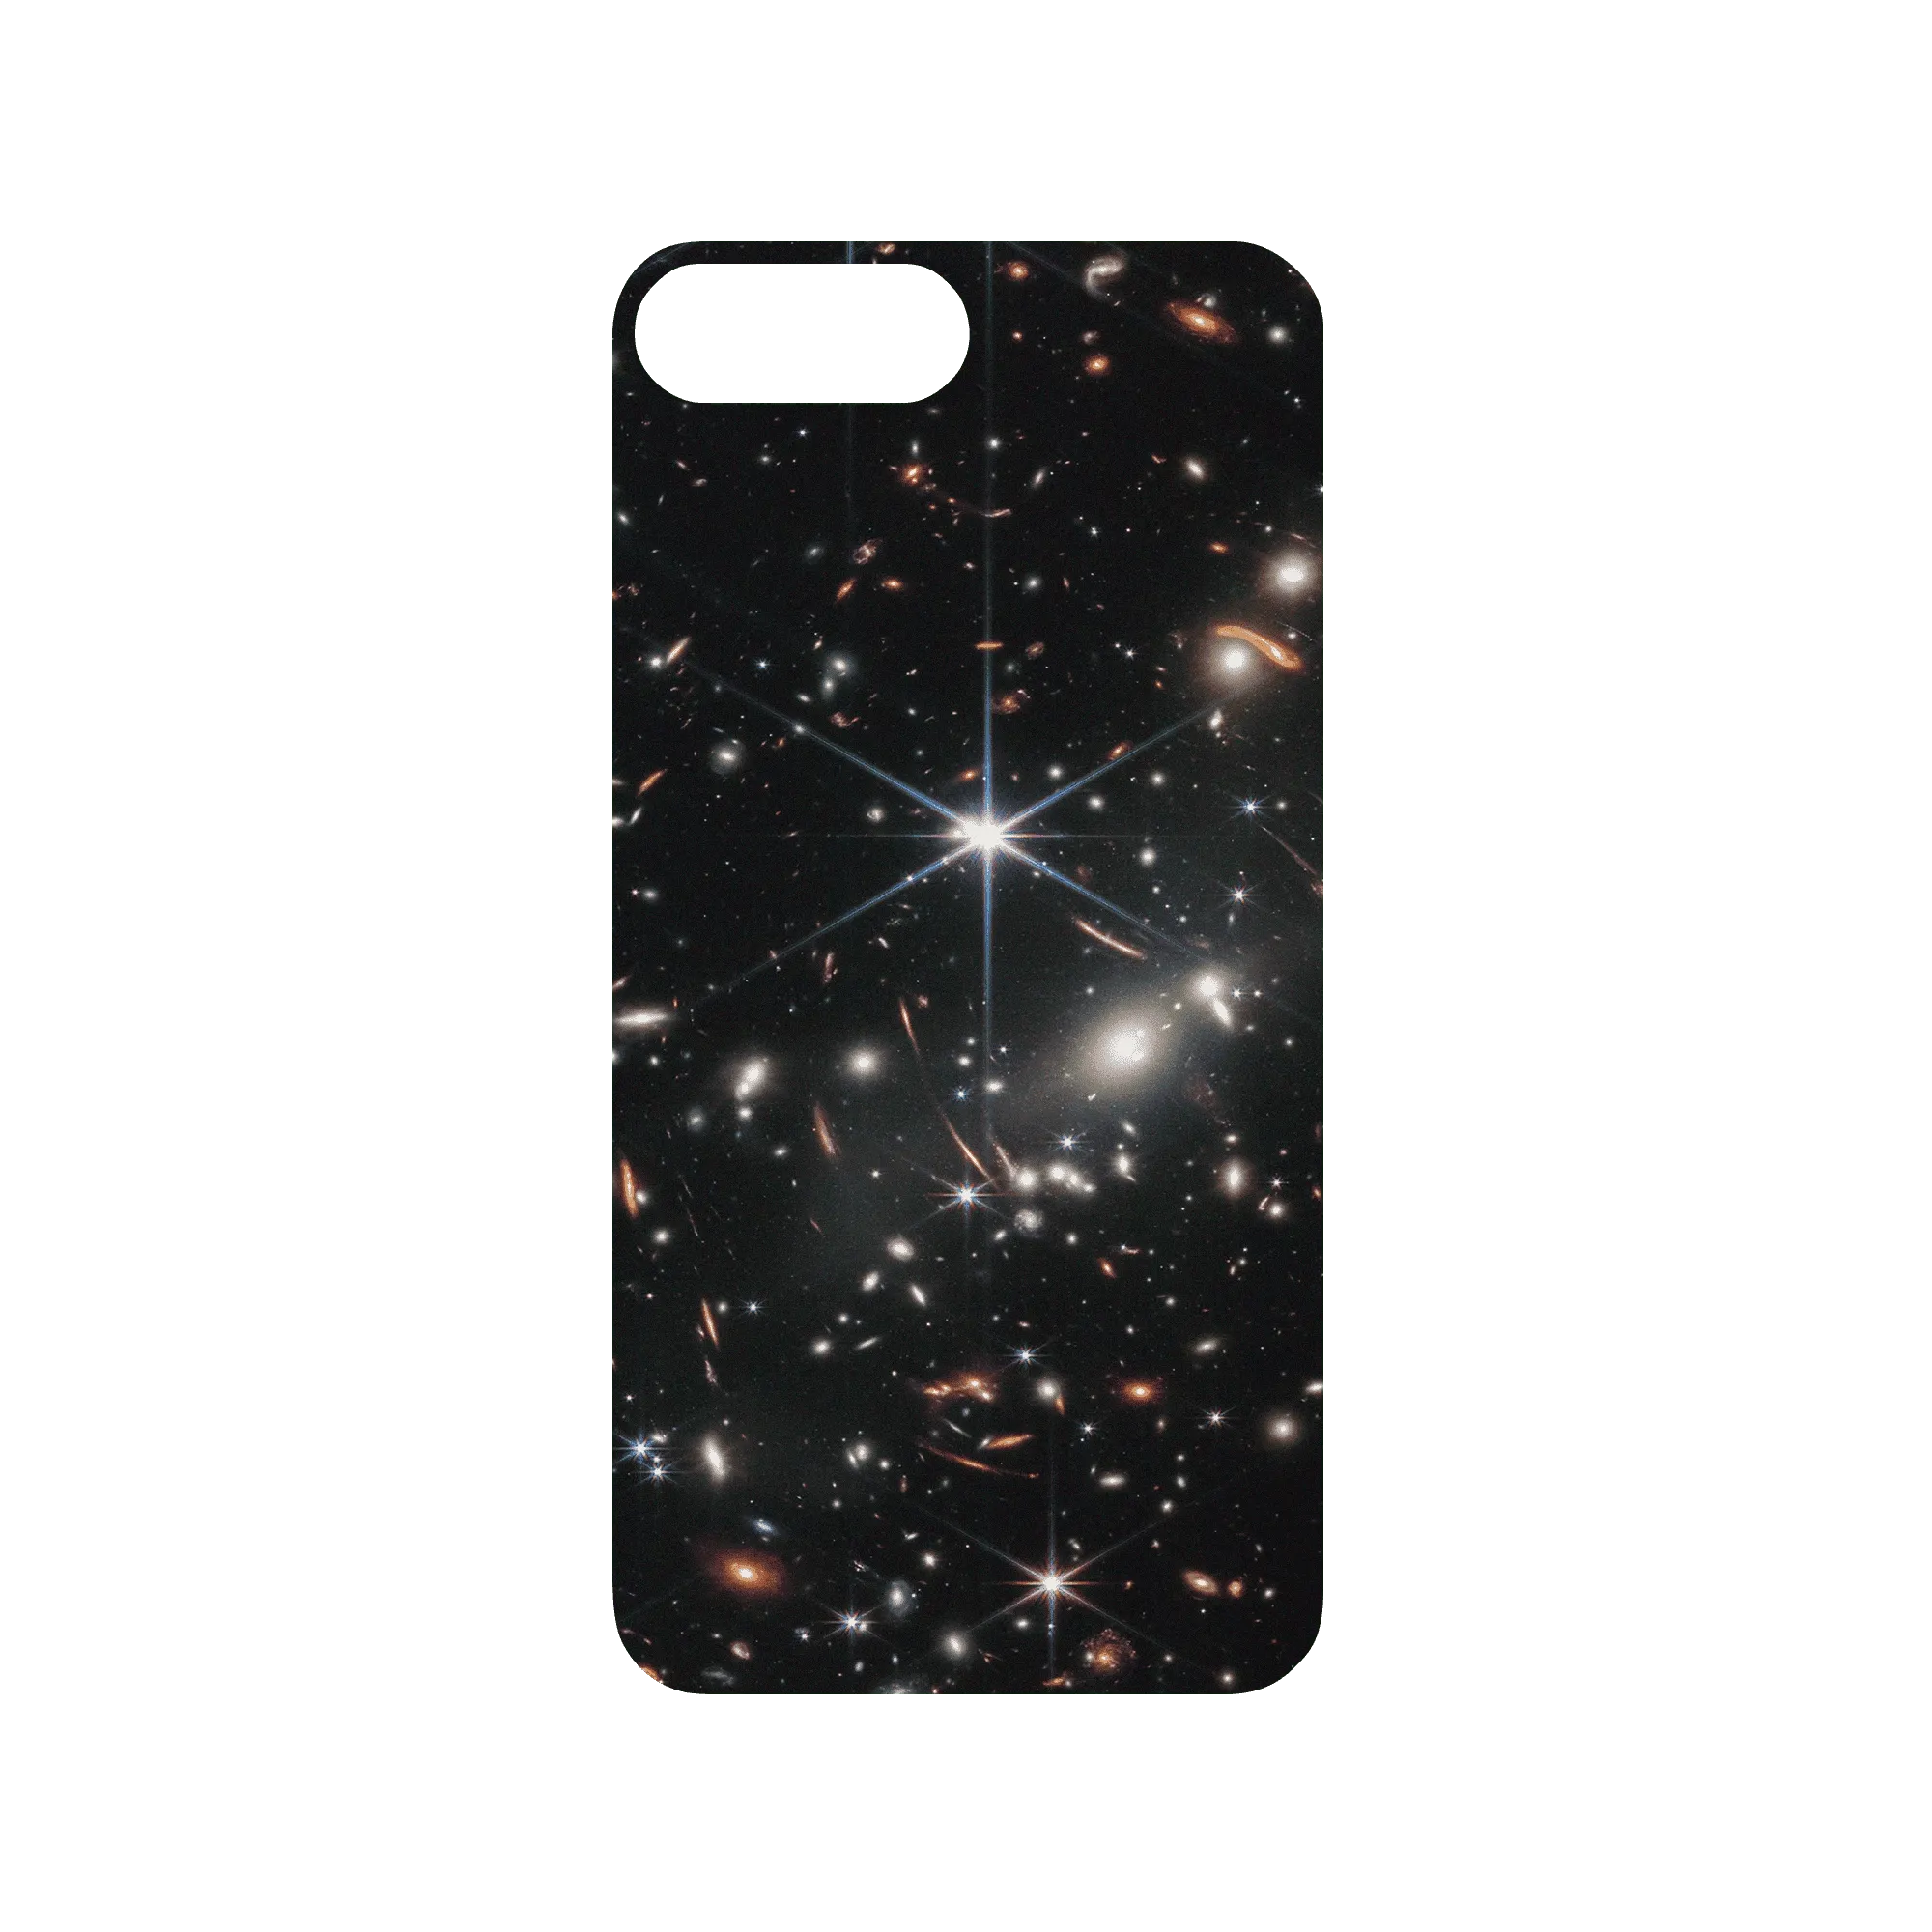 Cosmos Mod NX iPhone 8 Plus Case - Galaxy Cluster SMACS 0723 Backplate